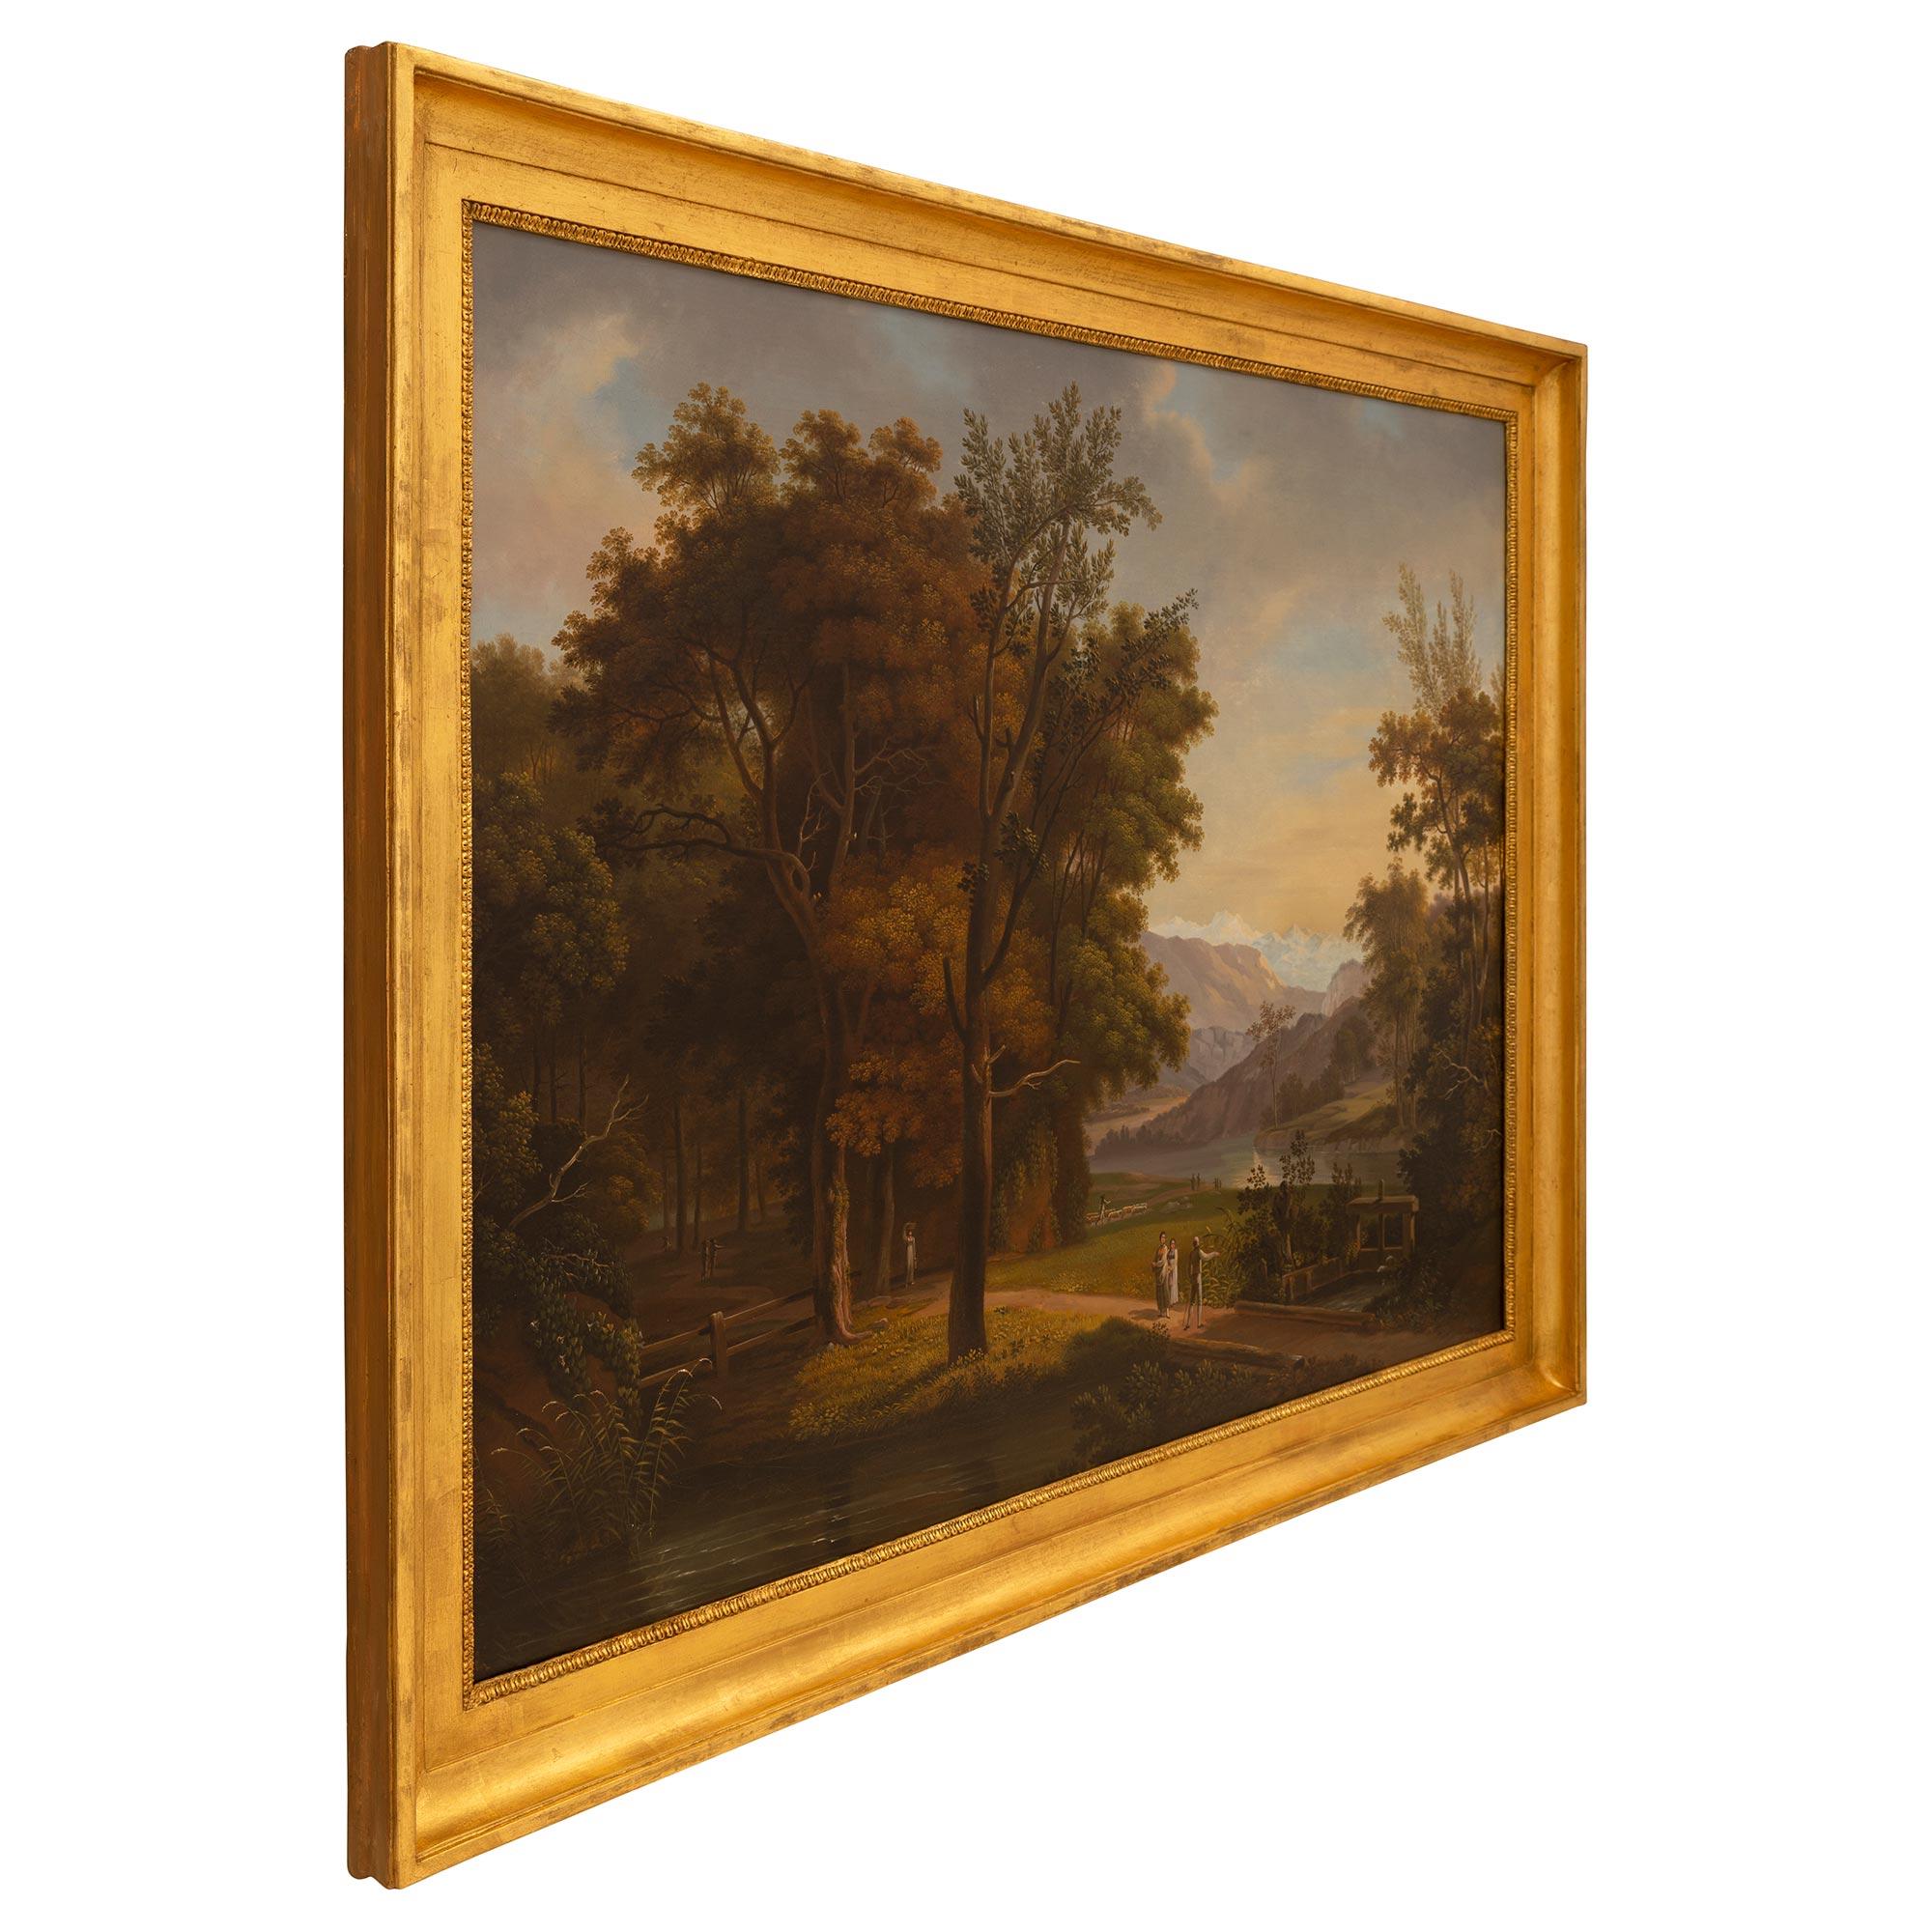 A stunning Italian late 18th century oil on canvas landscape painting. The painting depicts the beautiful Italian countryside with a charming path running through the center and water running under a bridge. In the background are a woman with a